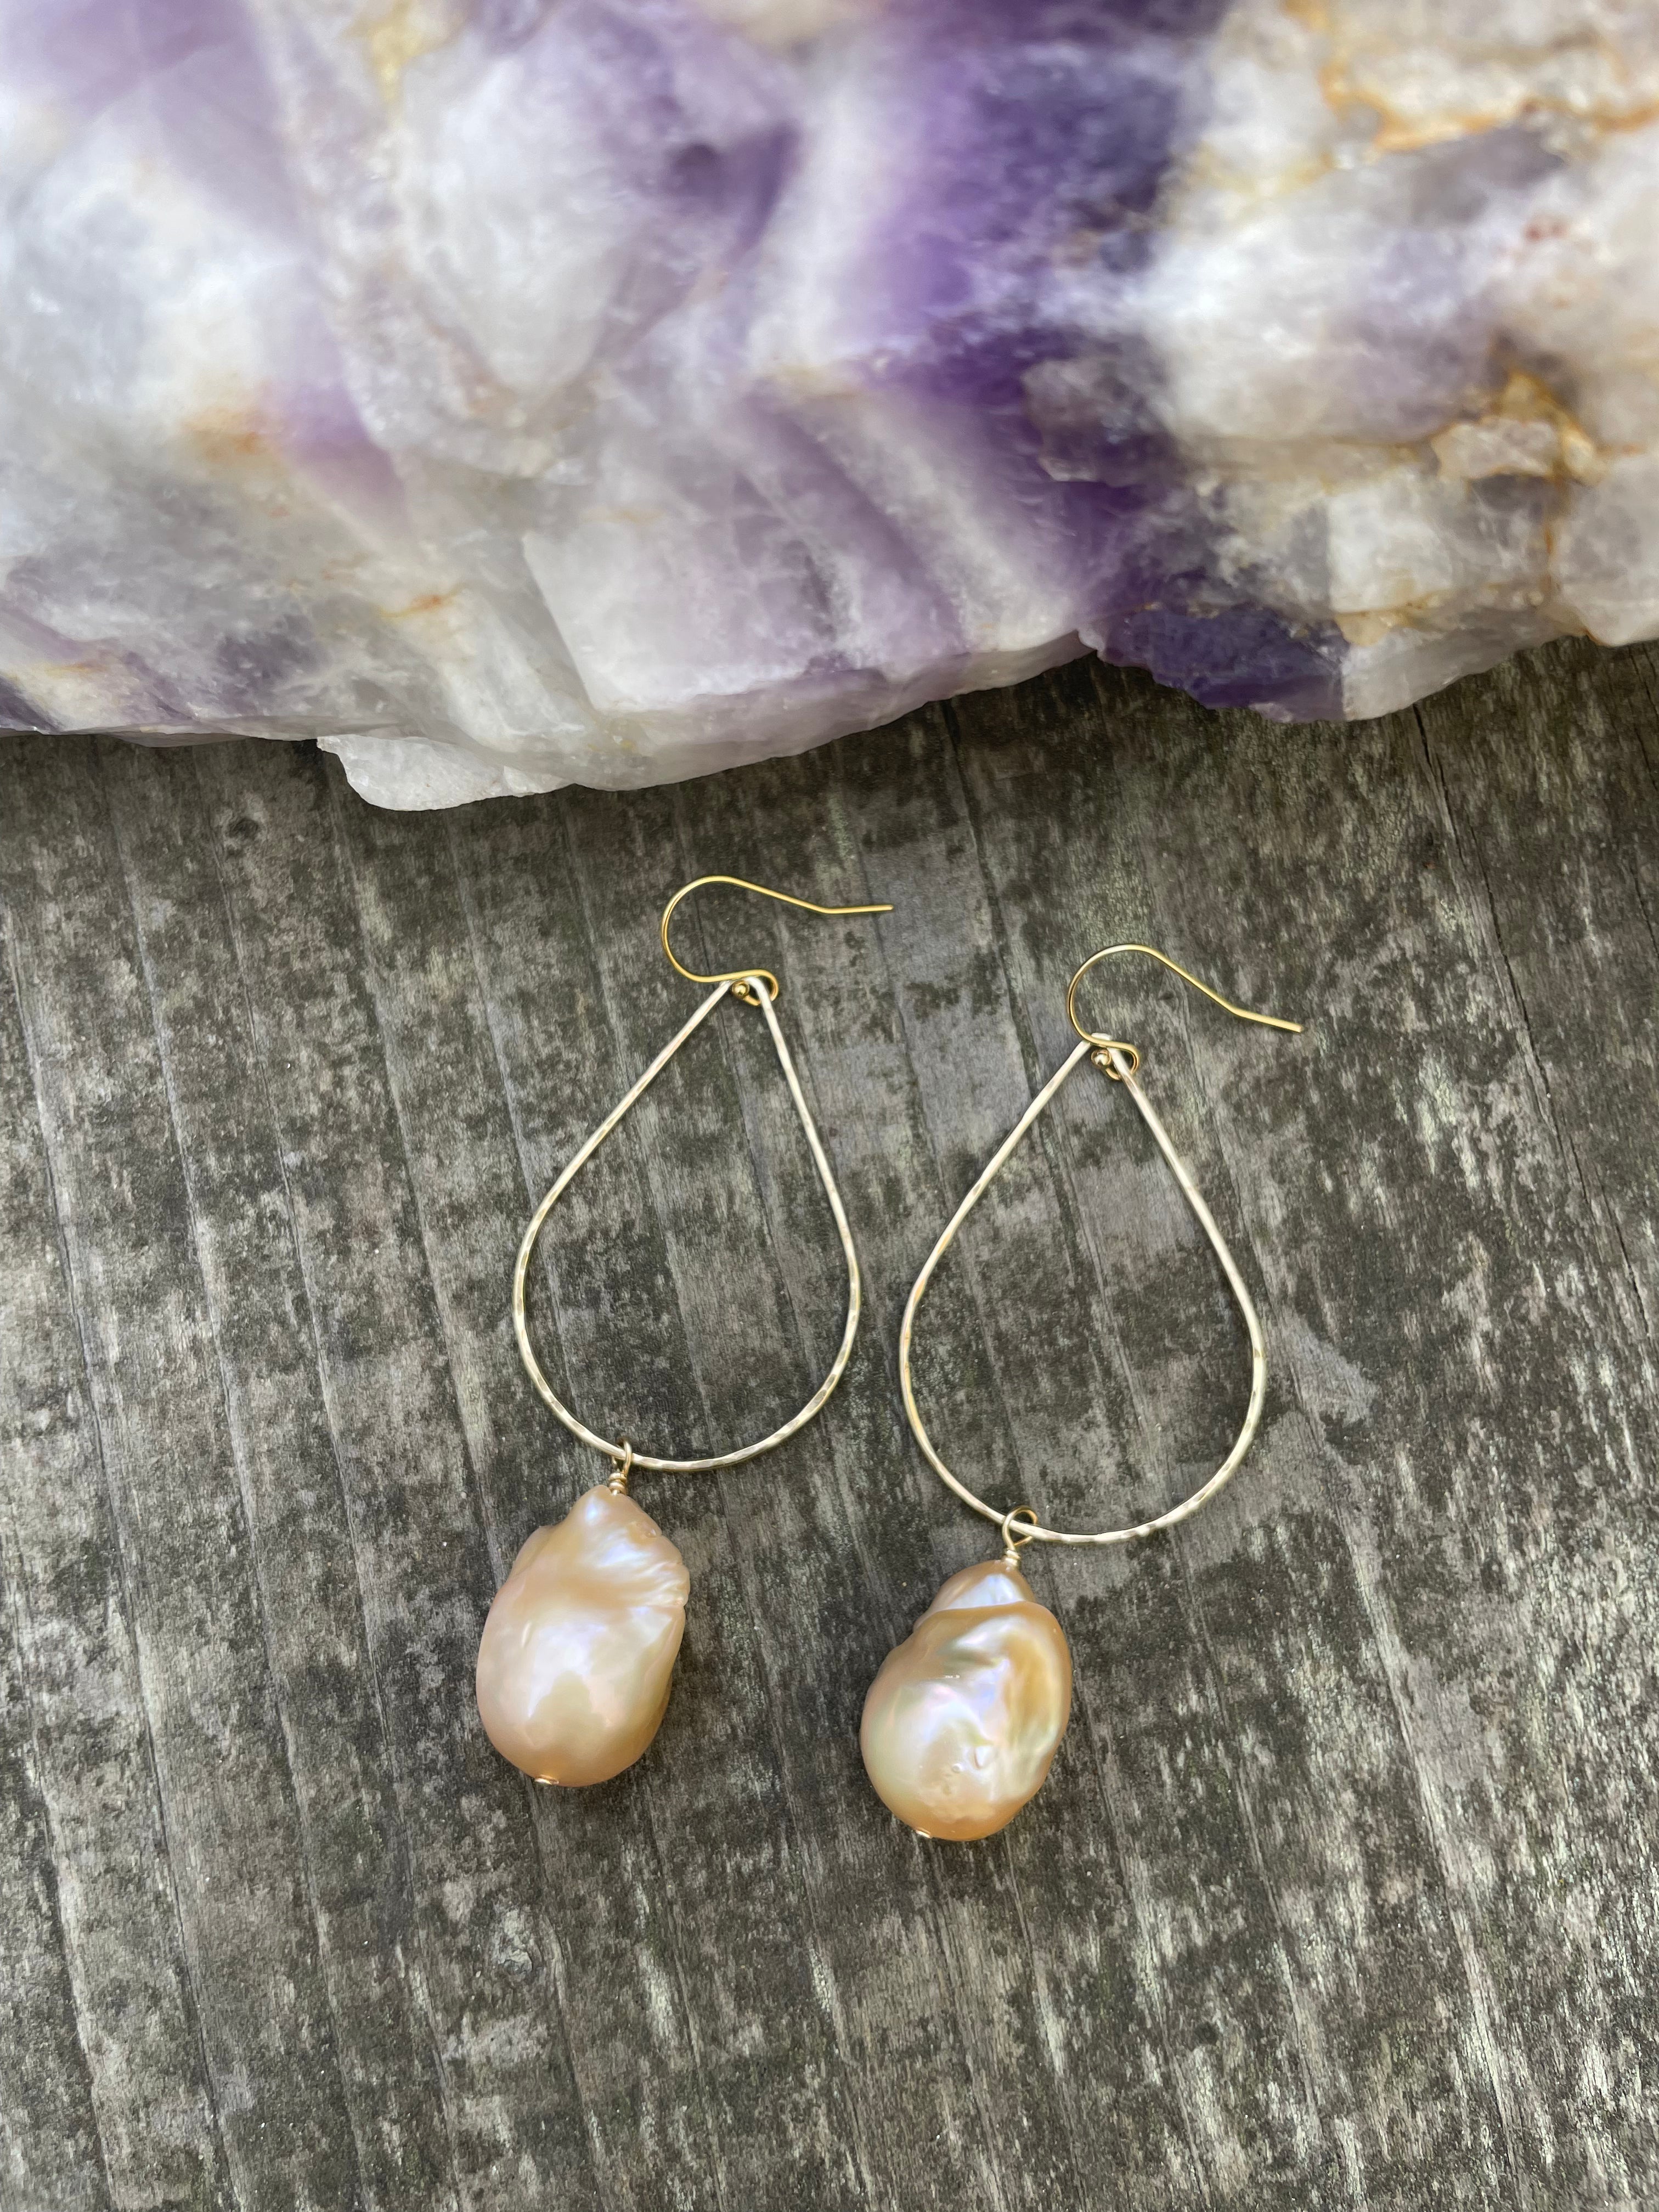 Large pink baroque fireball pearls hanging off of a teardrop shaped gold wire with ear wires on a wooden background. Above the earrings is a purple striped crystal.